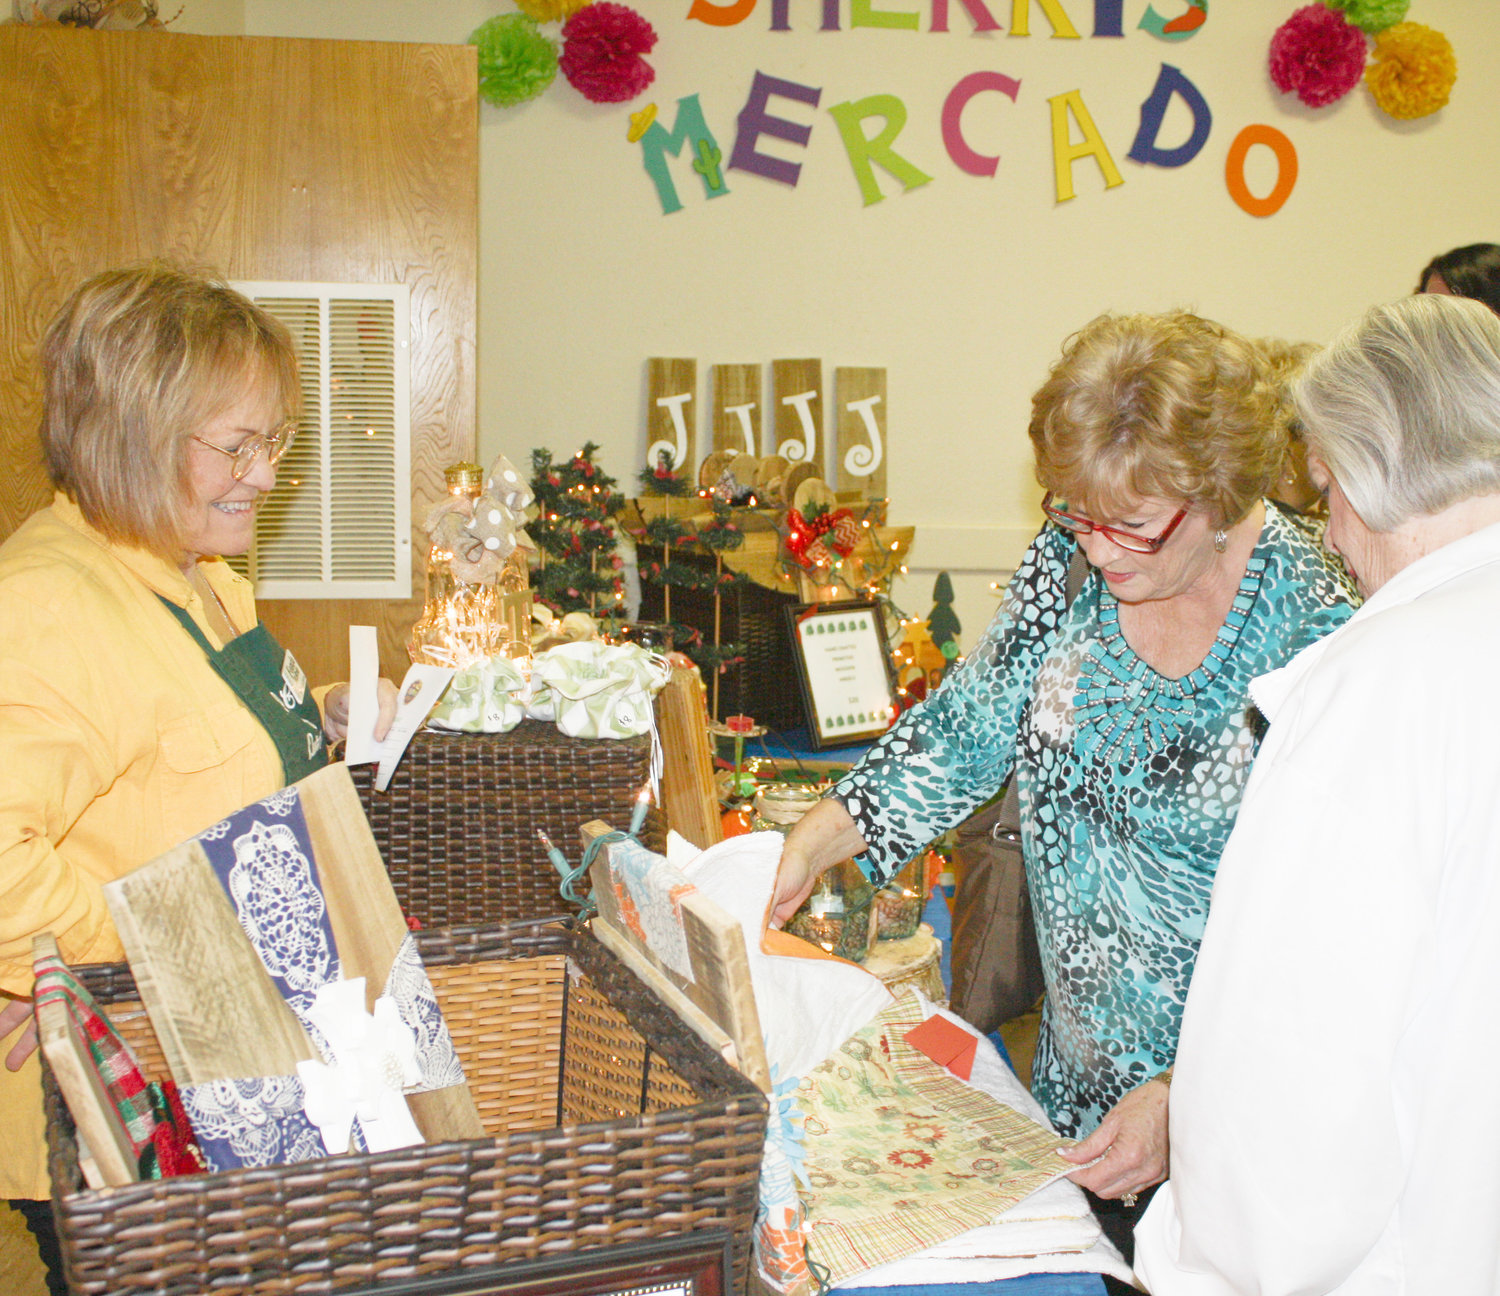 A couple of very interested shoppers take a close look at one of the offerings in Senora Sherri’s Mercado during the Quitman Pilot Club’s Fiesta Extravaganza Feliz Navidad.